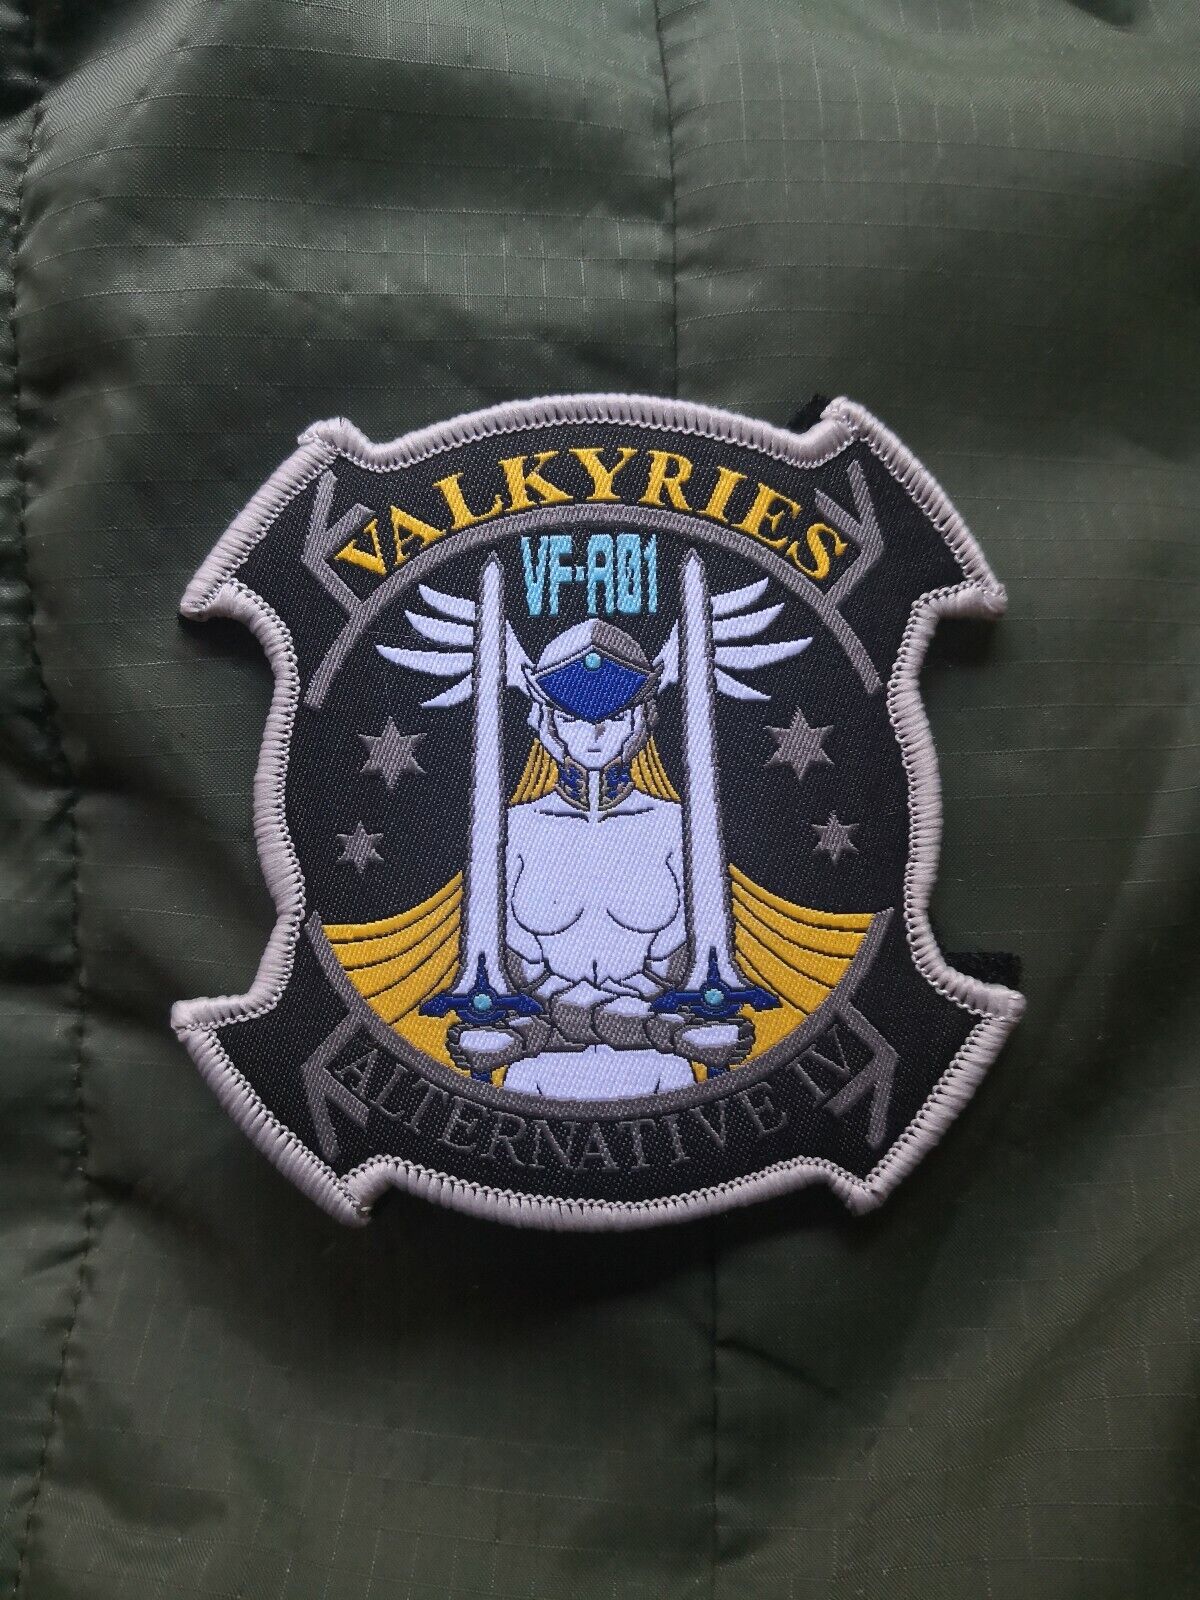 Muv Luv Valkyries Alternative Anime Airsoft Morale hook loop Combat Ace Patch